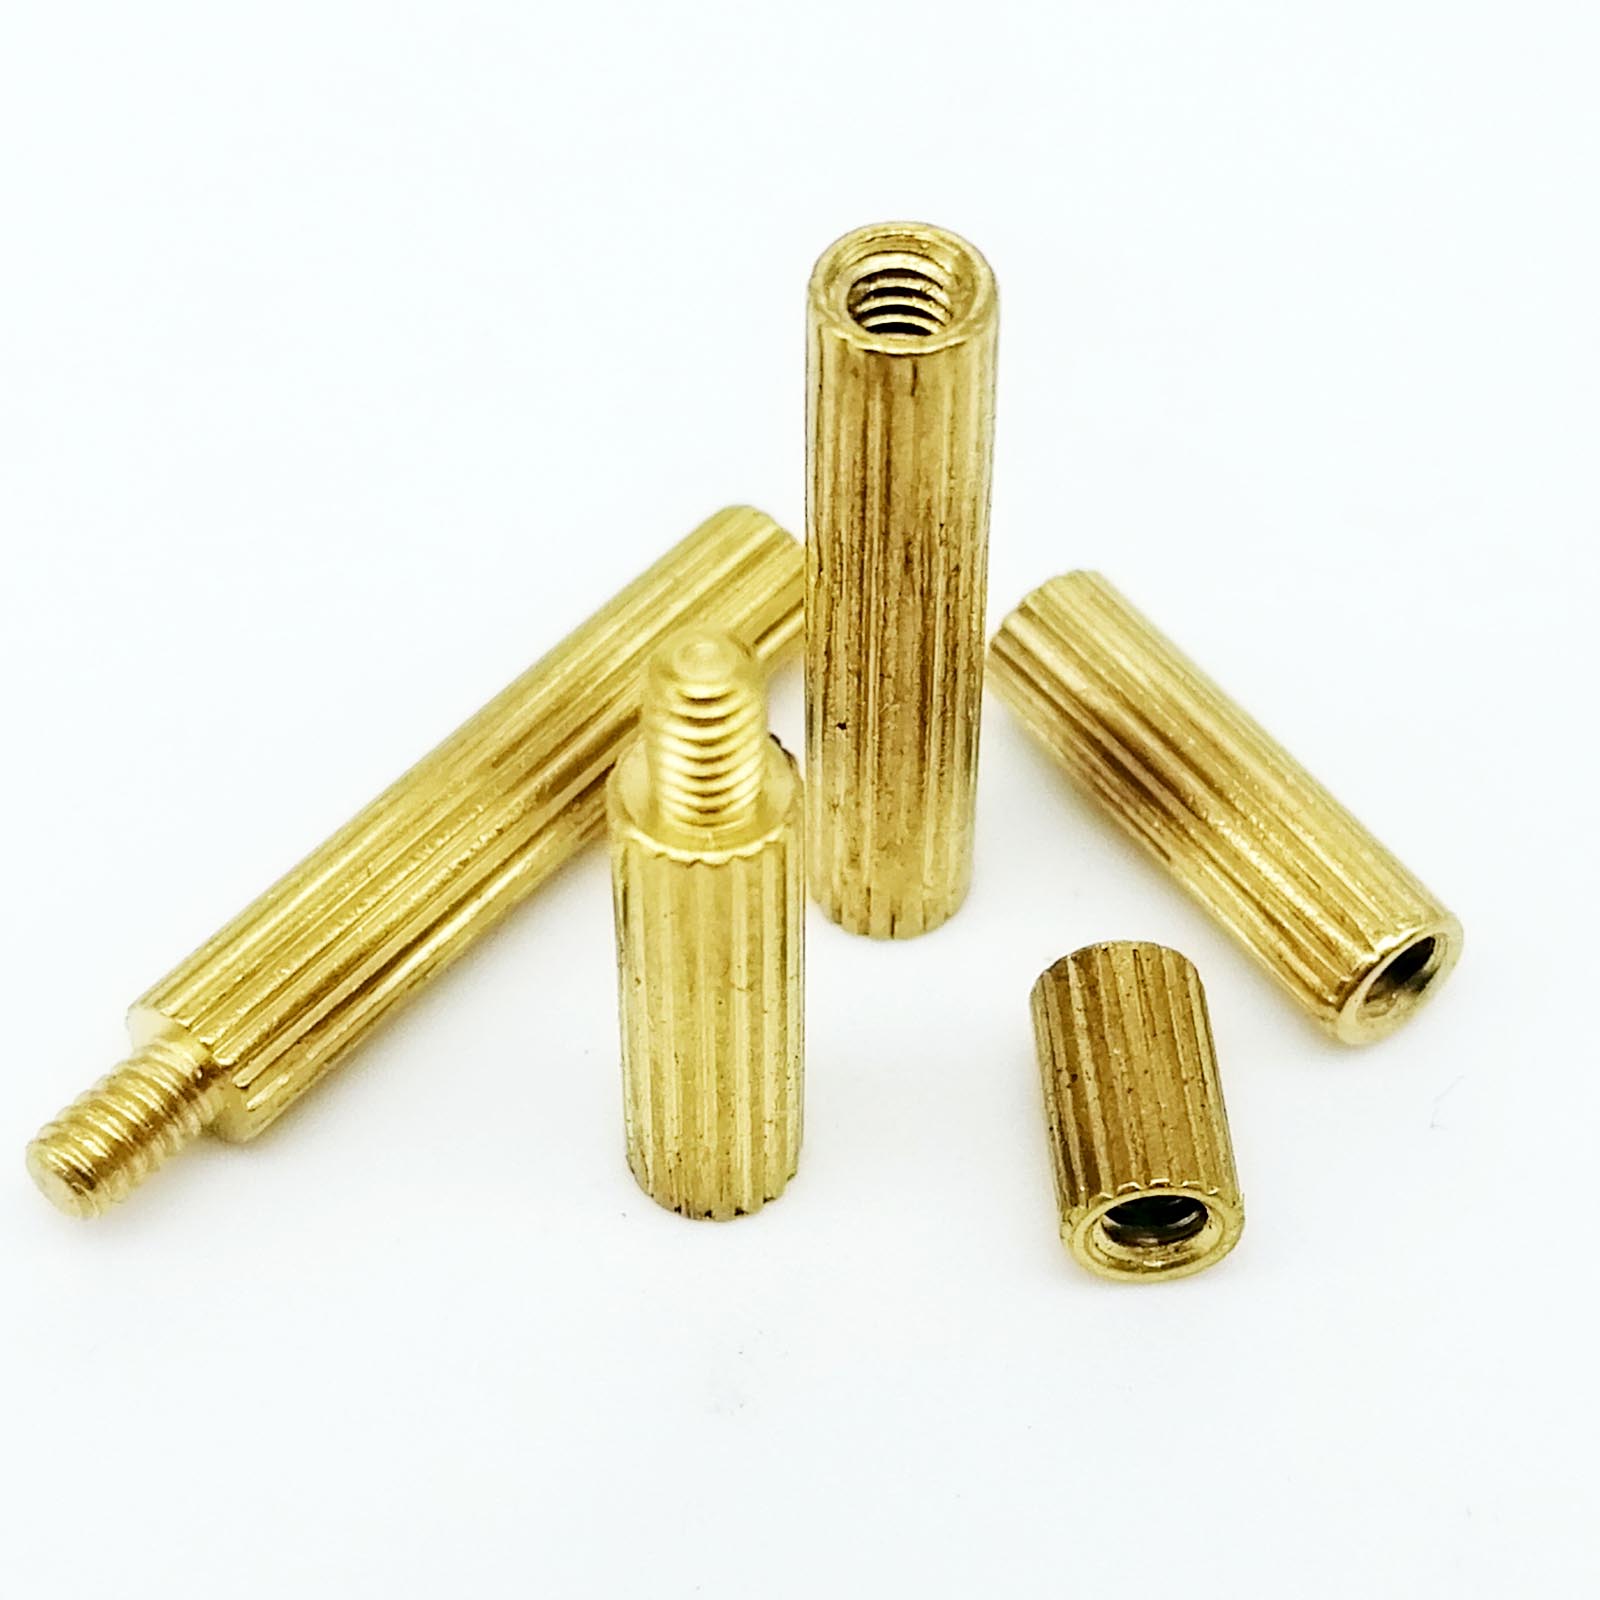 M4 Brass Threaded Hex Double Pass Spacer Copper Column Support Nut For PCB Board 